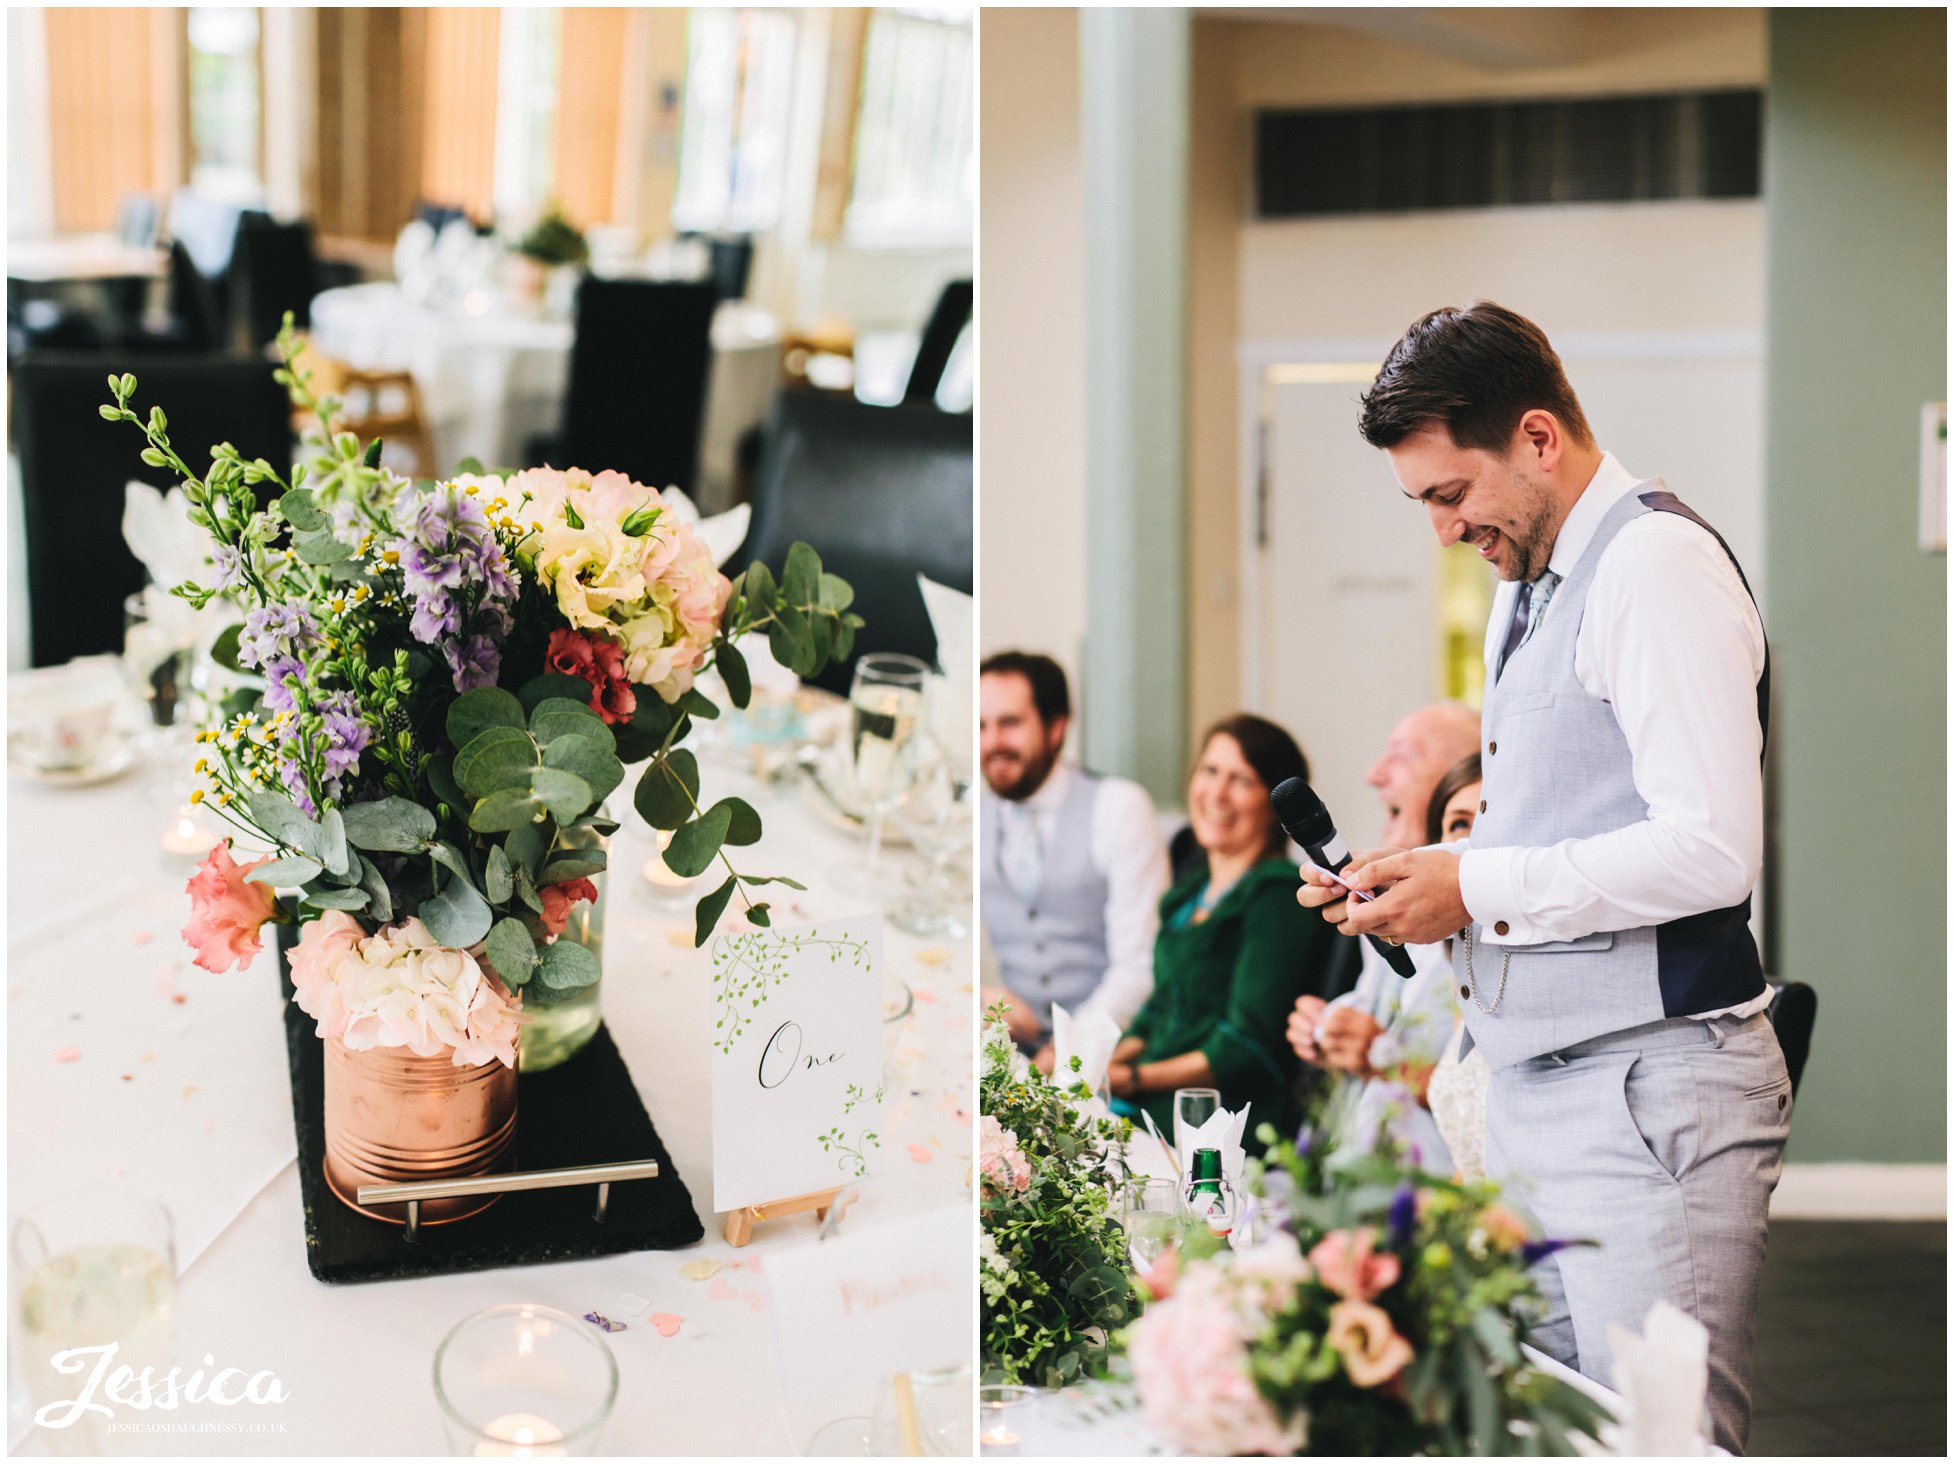 flowers decorate the tables whilst guests enjoy the speeches